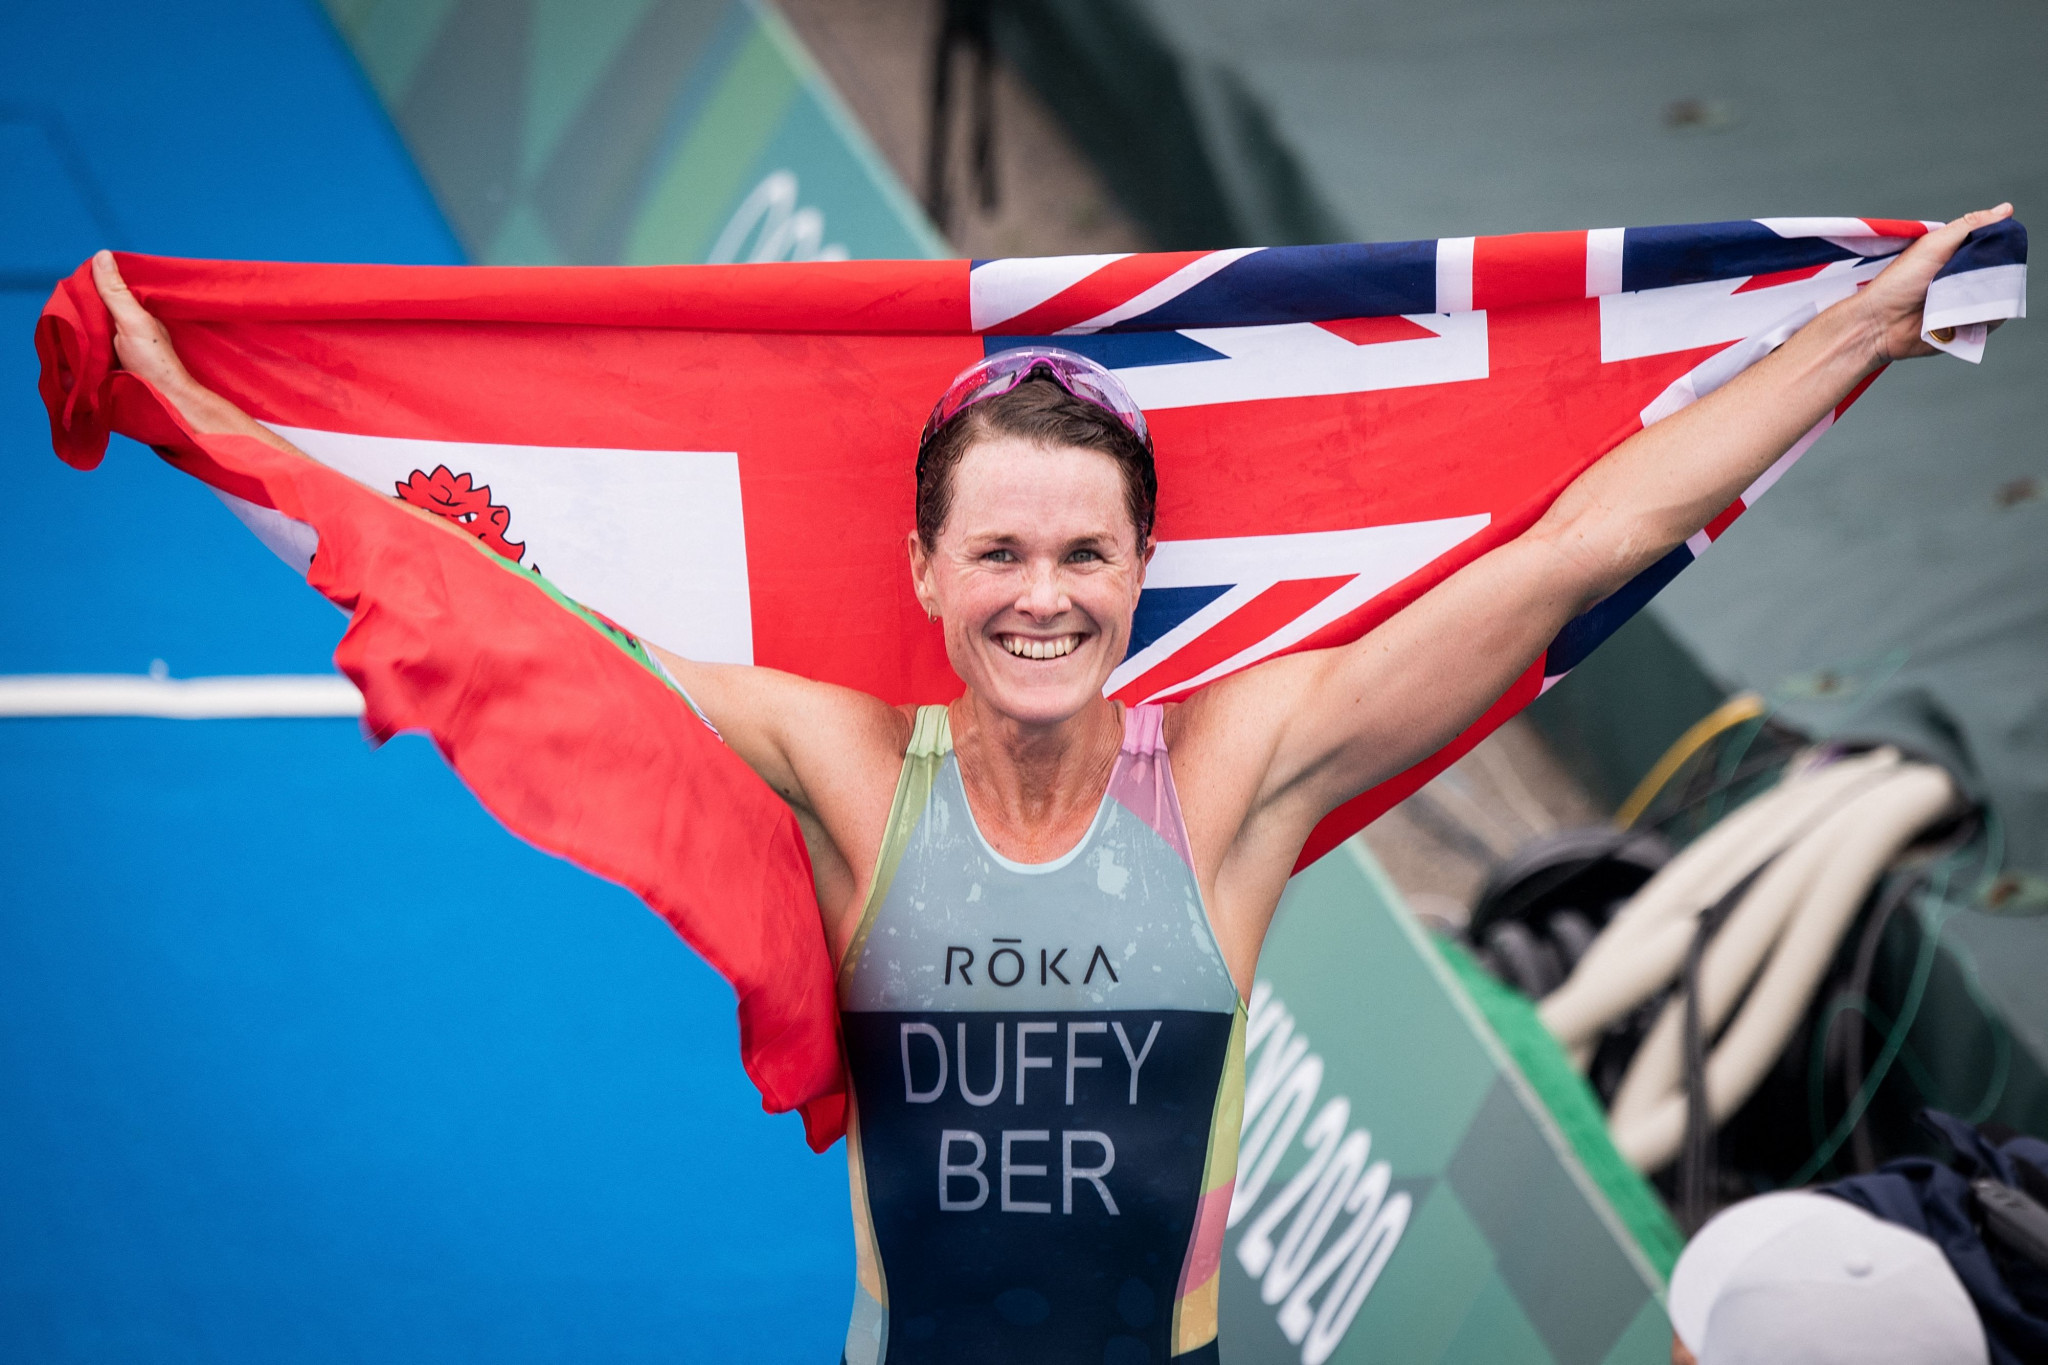 Flora Duffy was one of only two athletes to represent Bermuda at Tokyo 2020, but won her country's first gold medal when she was victorious in the triathlon ©Getty Images